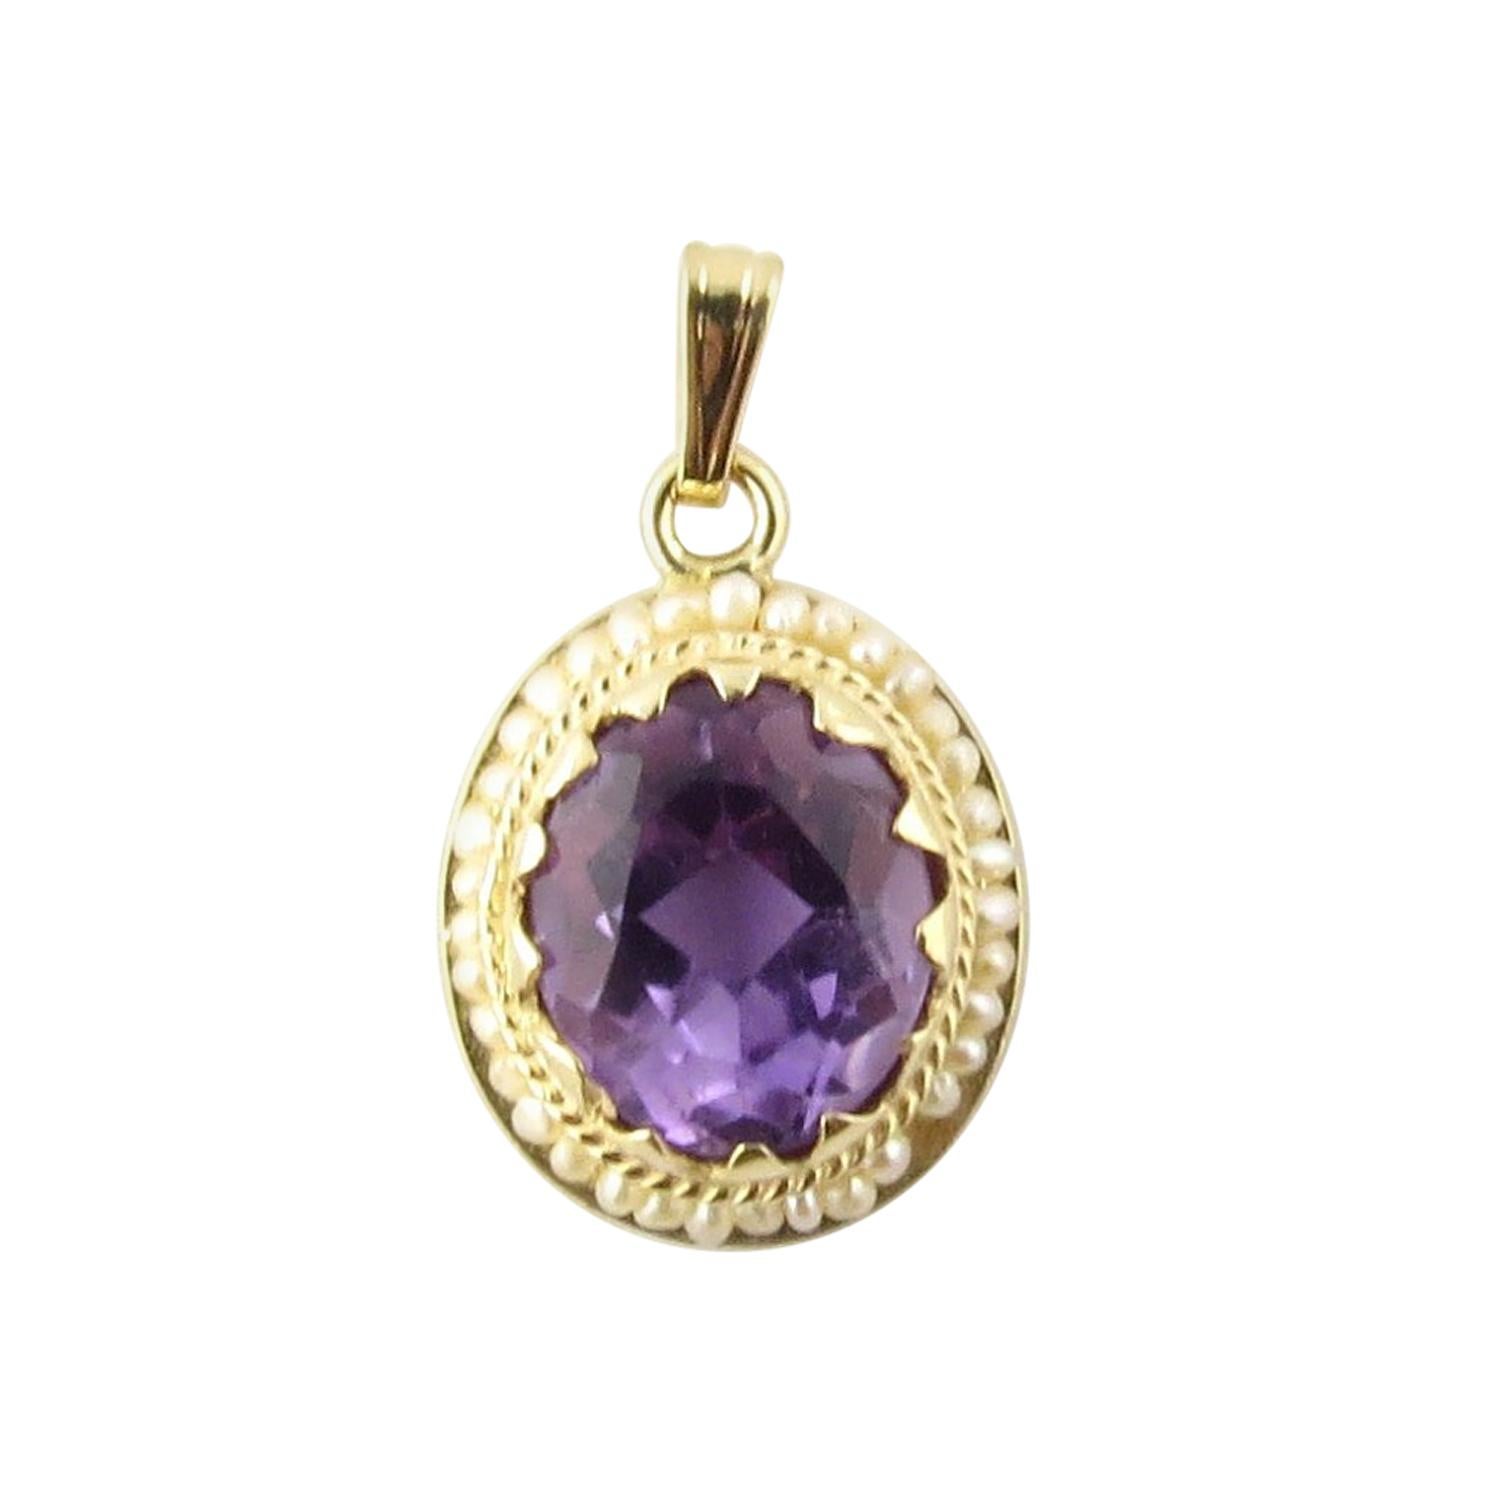 14 Karat Yellow Gold Amethyst and Seed Pearl Pendant